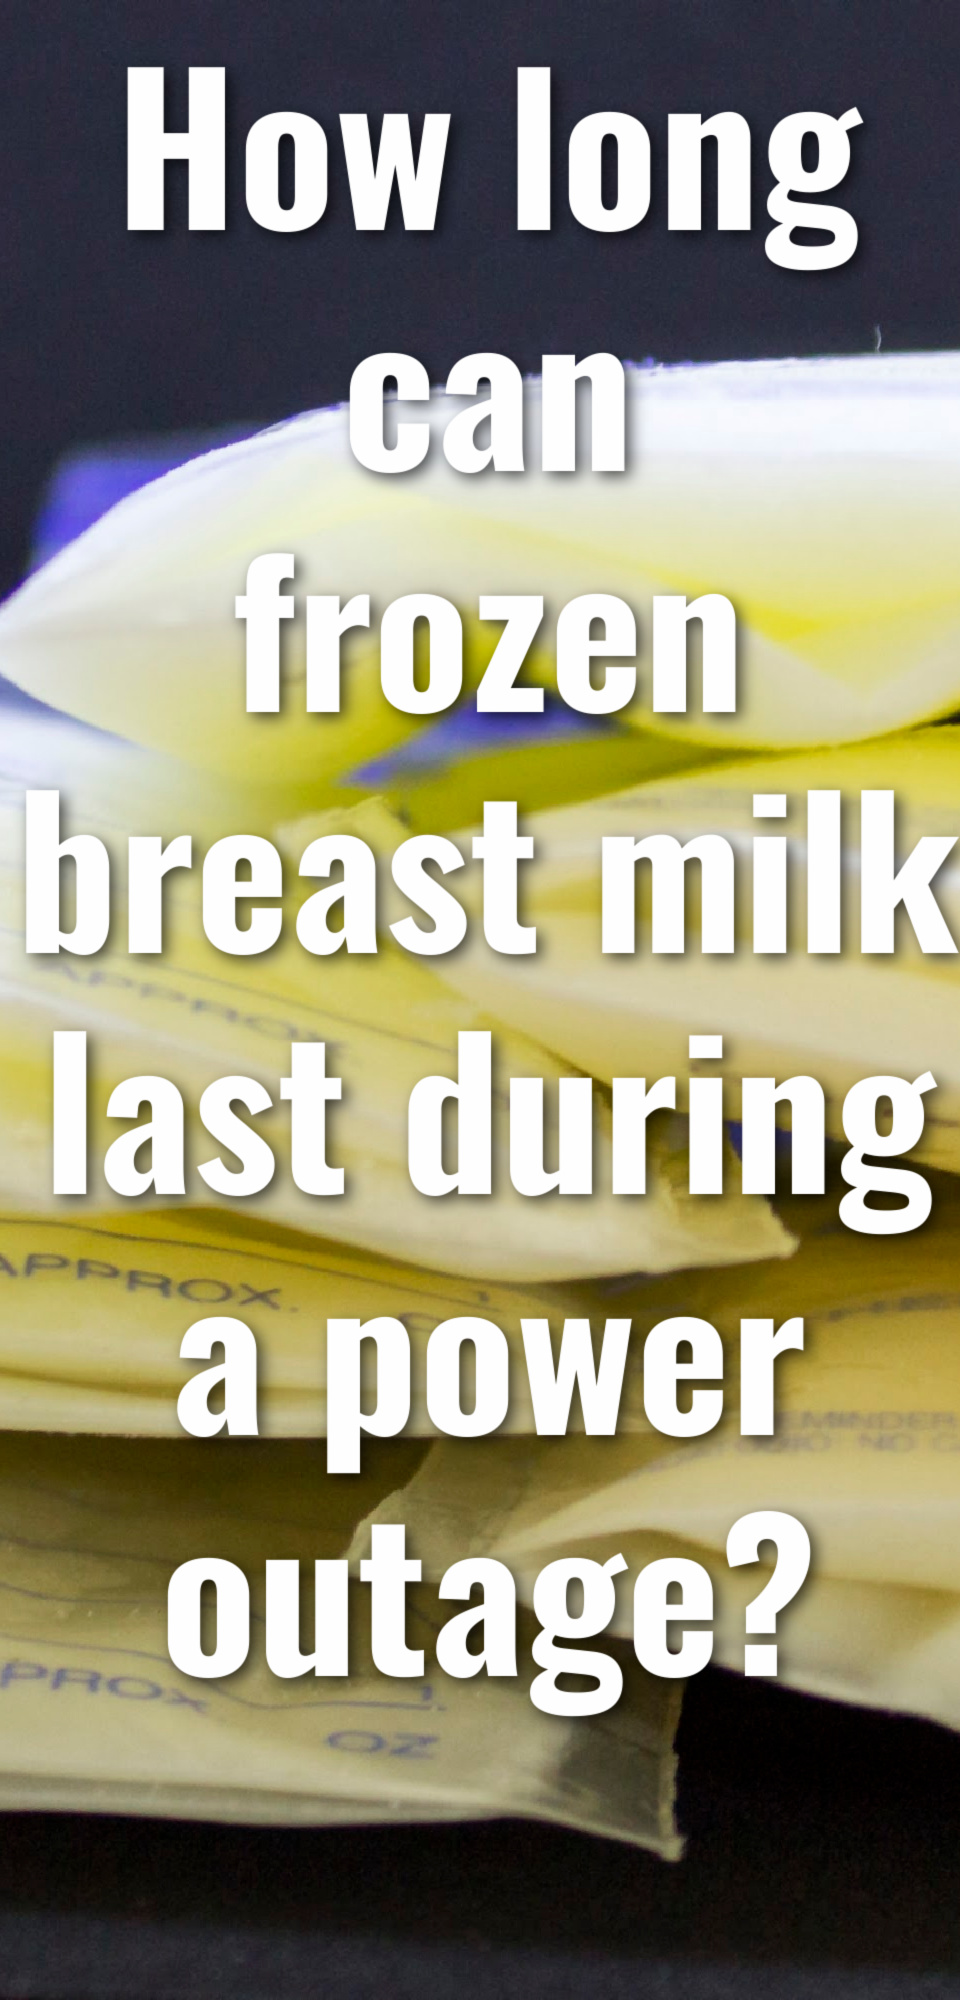 How Long Will Frozen Breast Milk Last in a Power Outage?